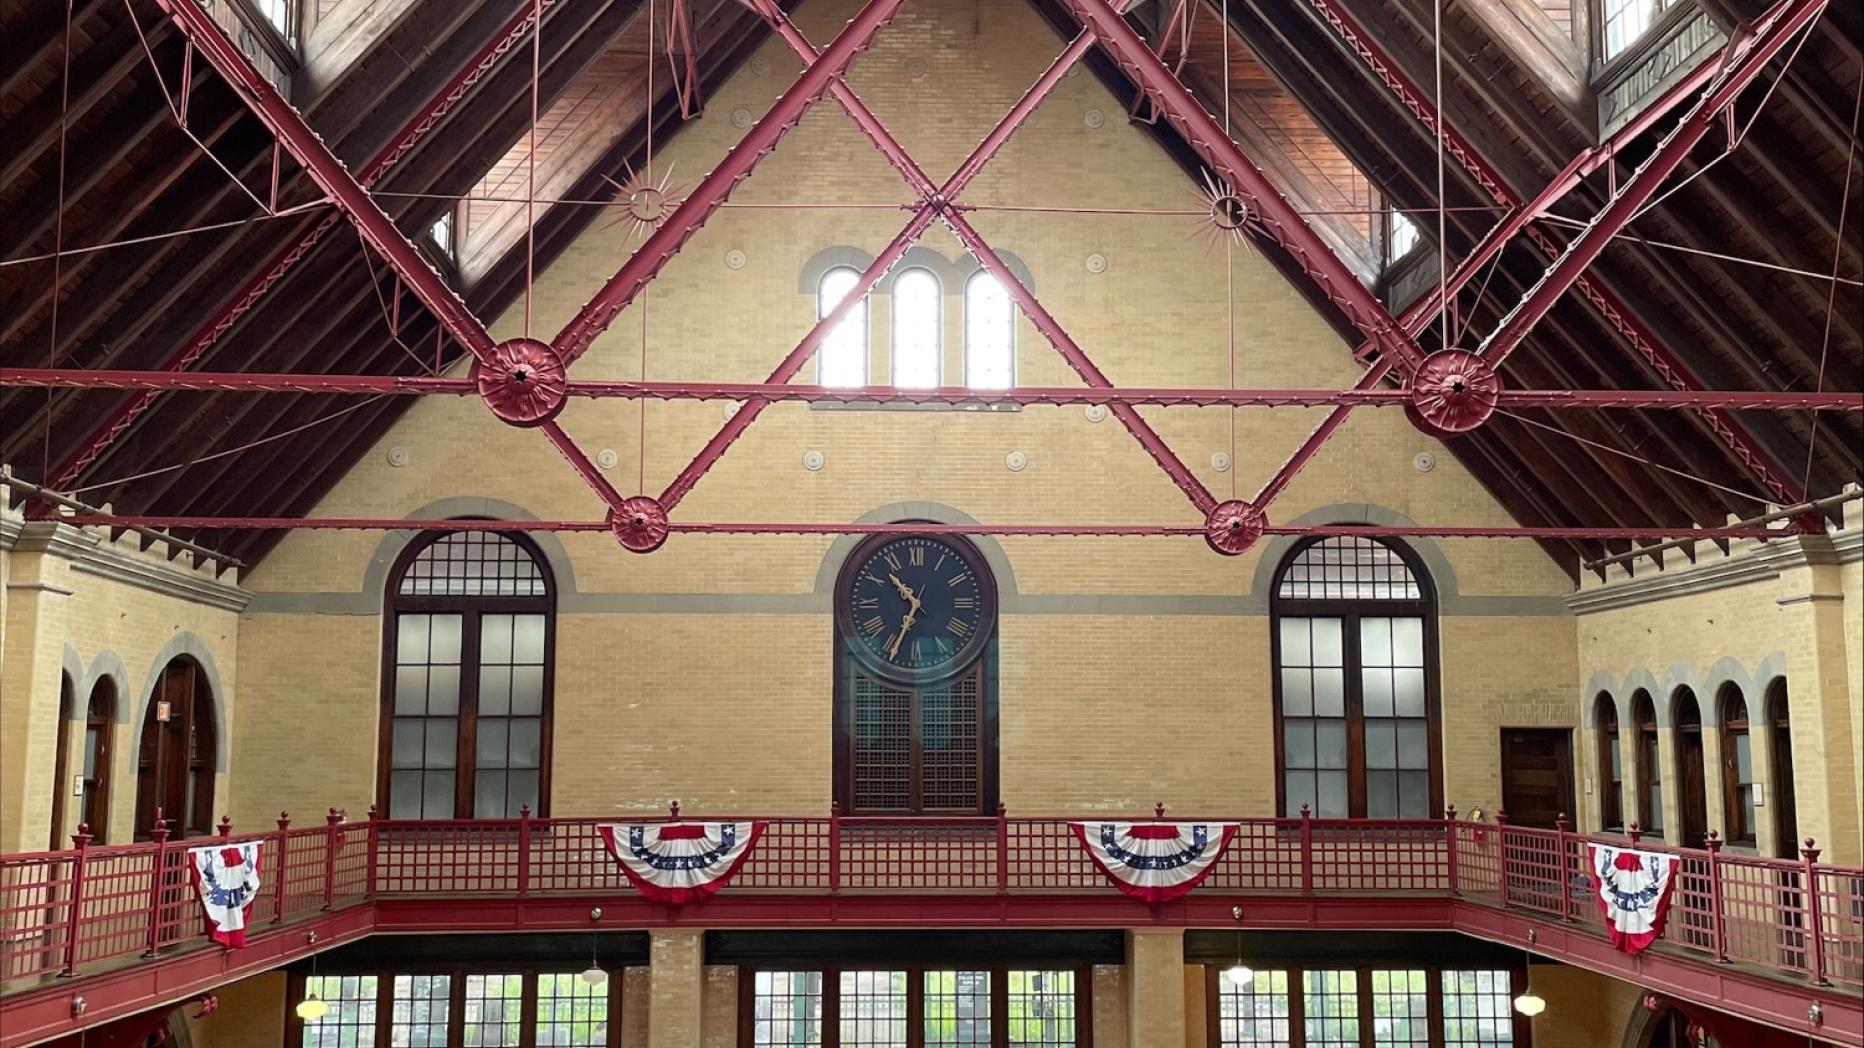 View of the interior of Central Railroad of New Jersey at Liberty State Park